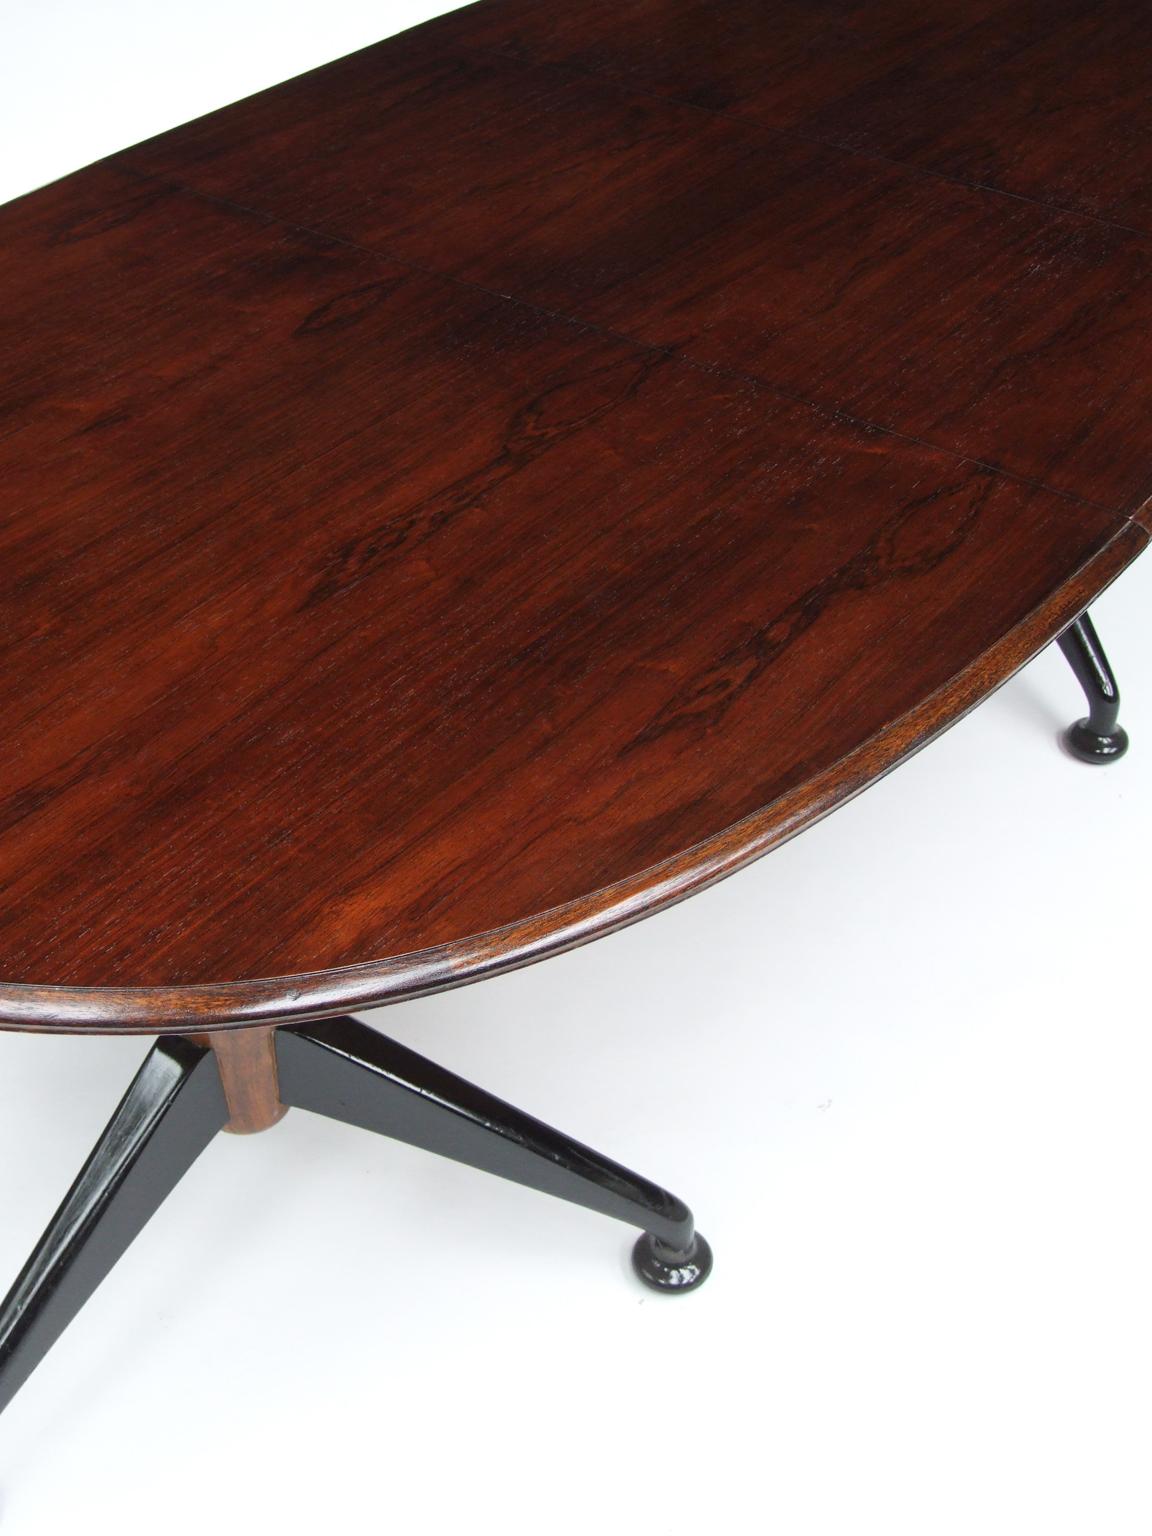 Mid-Century Modern 1950s Rosewood Extendable Oval Dining Table by A J Milne for Heals, London For Sale